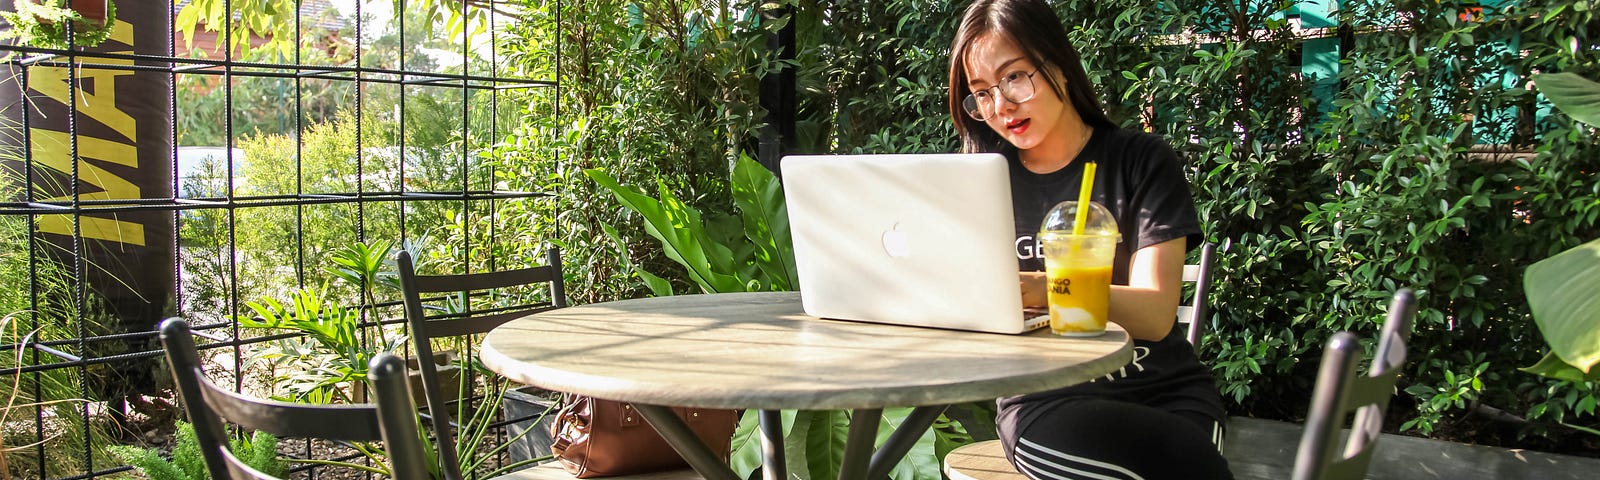 Woman sitting at a table, working on her laptop. She is on a lawn, surrounded by plants and small trees in an indoor/outdoor hybrid setting. She has a yellow beverage next to her laptop.